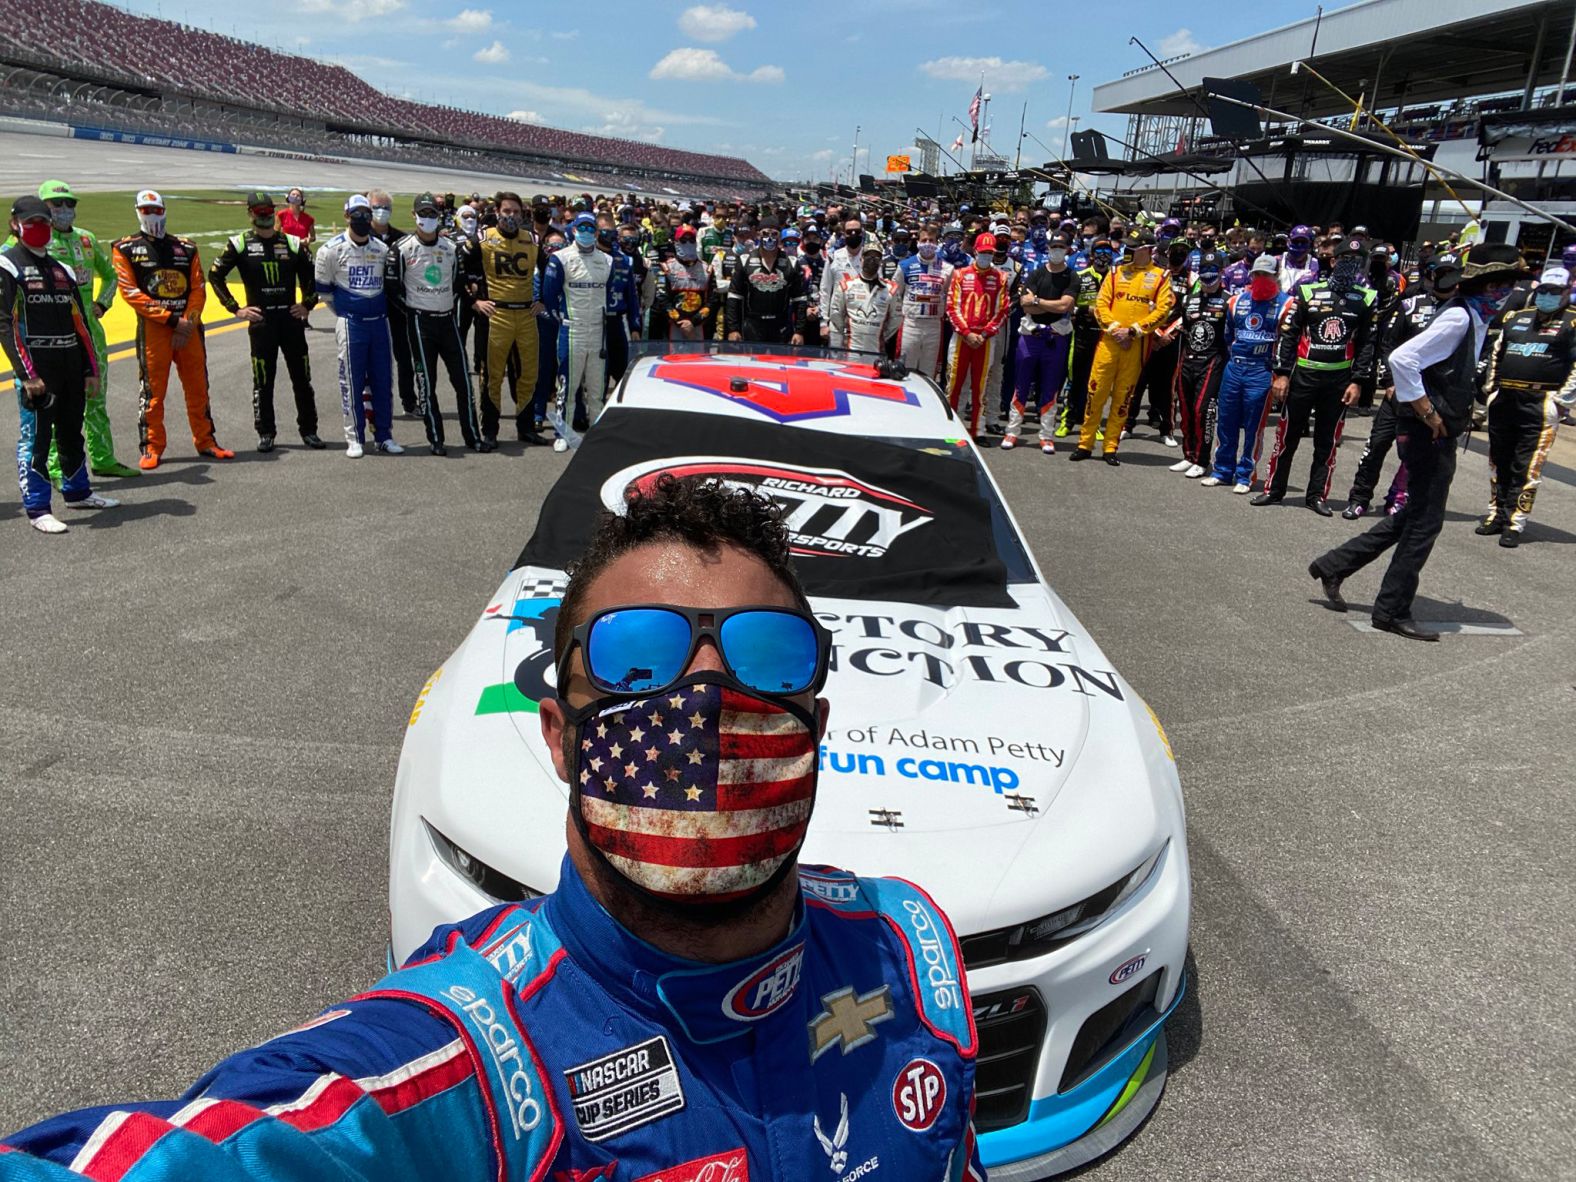 NASCAR driver Bubba Wallace <a href="index.php?page=&url=https%3A%2F%2Ftwitter.com%2FBubbaWallace%2Fstatus%2F1275141190824996864" target="_blank" target="_blank">tweeted this selfie</a> before a Cup Series race in Talladega, Alabama, on June 22. Fellow drivers and pit crew members <a href="index.php?page=&url=https%3A%2F%2Fwww.cnn.com%2F2020%2F06%2F22%2Fus%2Fnascar-race-bubba-wallace-talladega%2Findex.html" target="_blank">walked alongside Wallace's car</a> to show their support for him. Wallace, the only Black driver in NASCAR's top circuit, has been an outspoken advocate of the Black Lives Matter movement. 